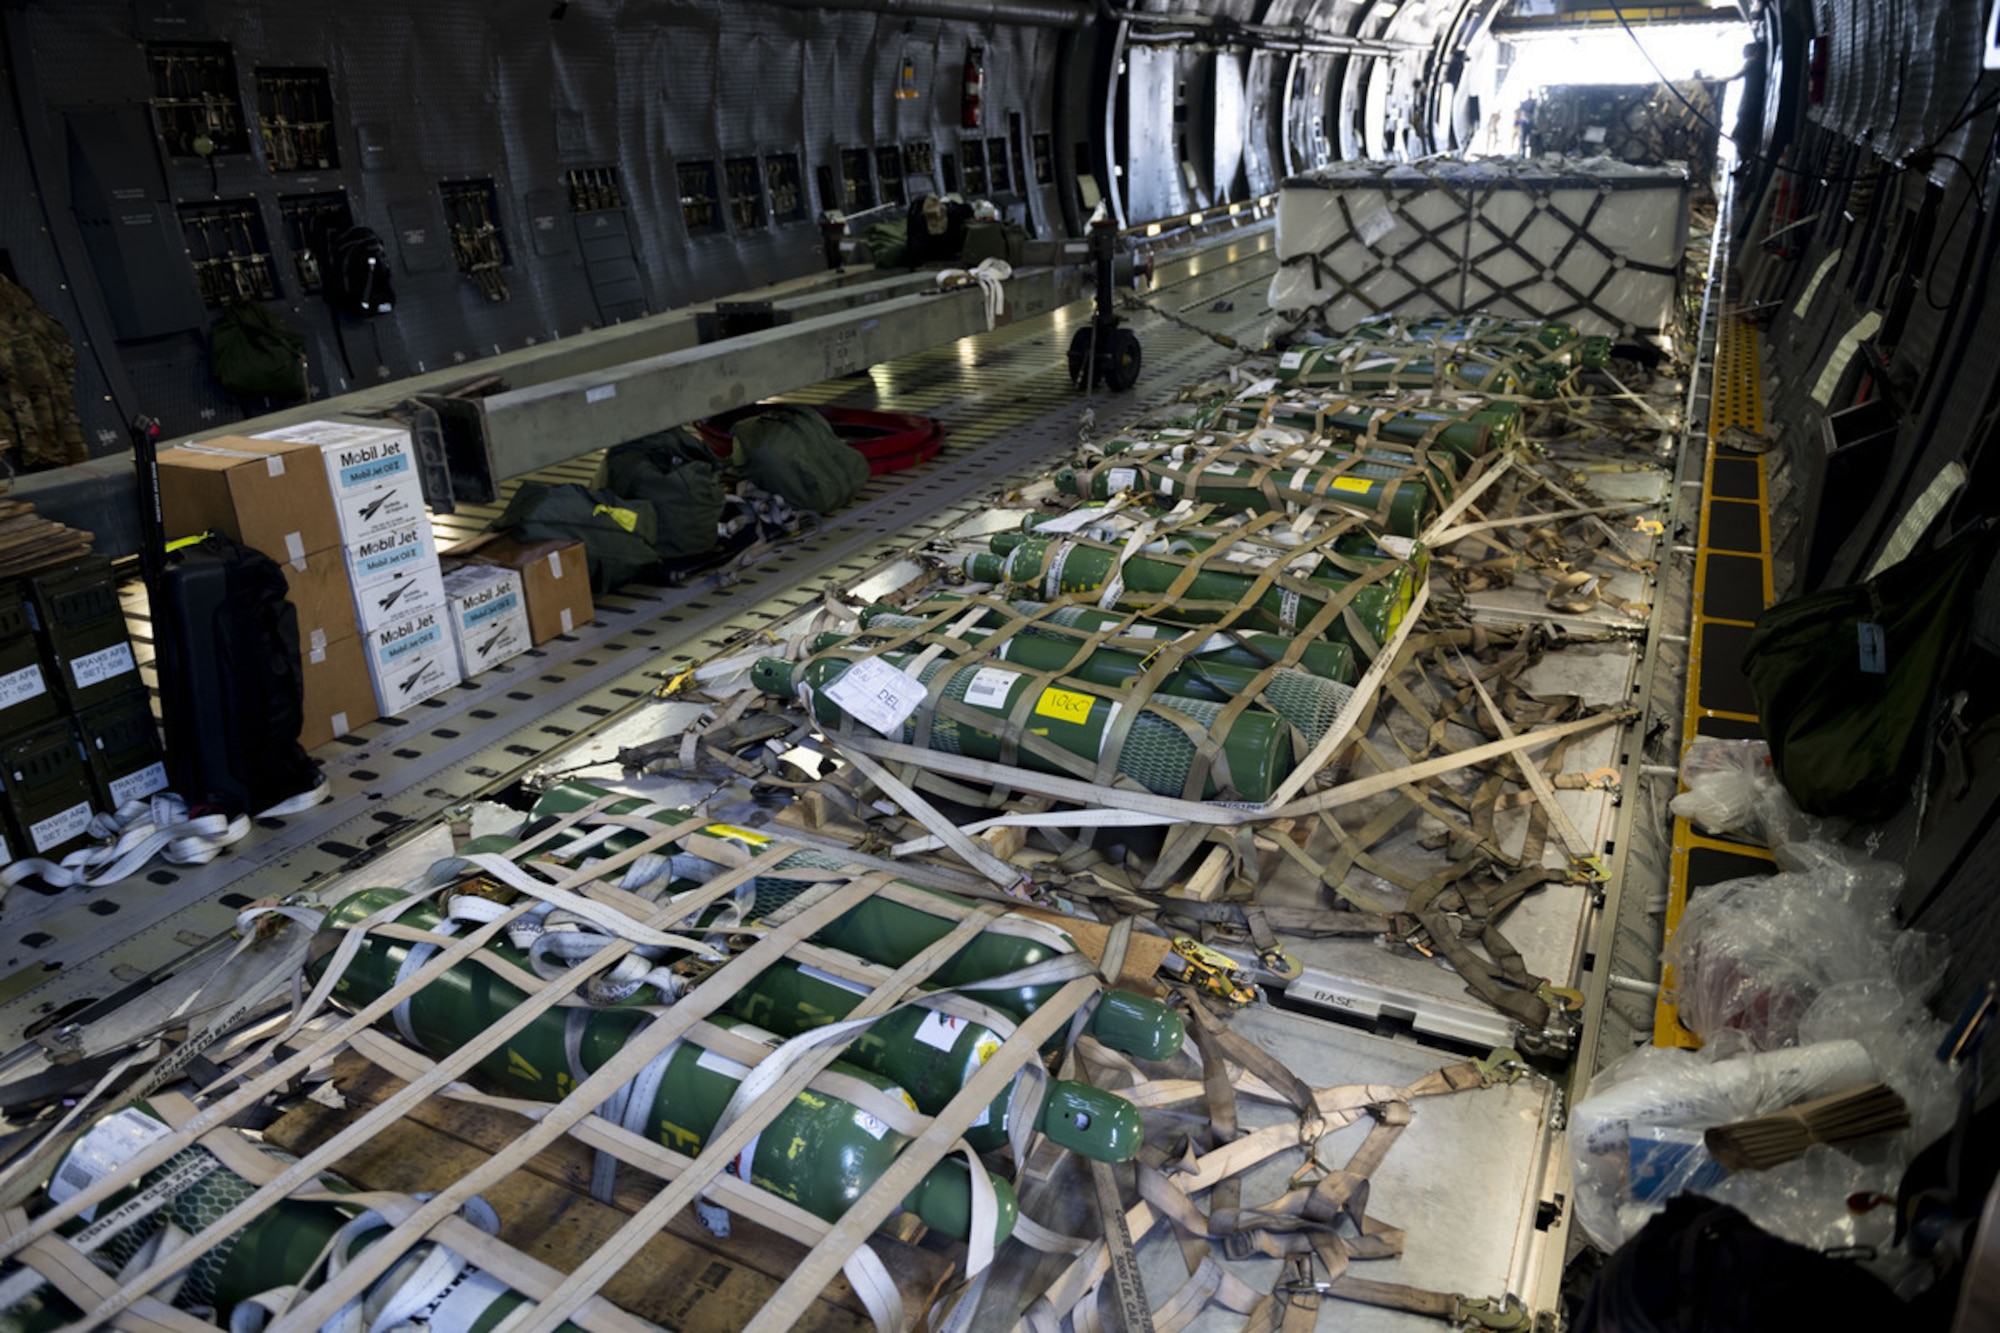 Oxygen tanks and other COVID-19 supplies sit in a C-5M Super Galaxy at Travis Air Force Base, Calif., April 28, 2021. The United States government, through the U.S. Agency for International Development, donated medical supplies to assist the country of India in its ongoing fight against COVID-19. The aid includes 440 oxygen cylinders and regulators, 1 million N95 masks and 1 million COVID-19 rapid diagnostic kits. (U.S. Air Force photo by Senior Airman Jonathon Carnell)